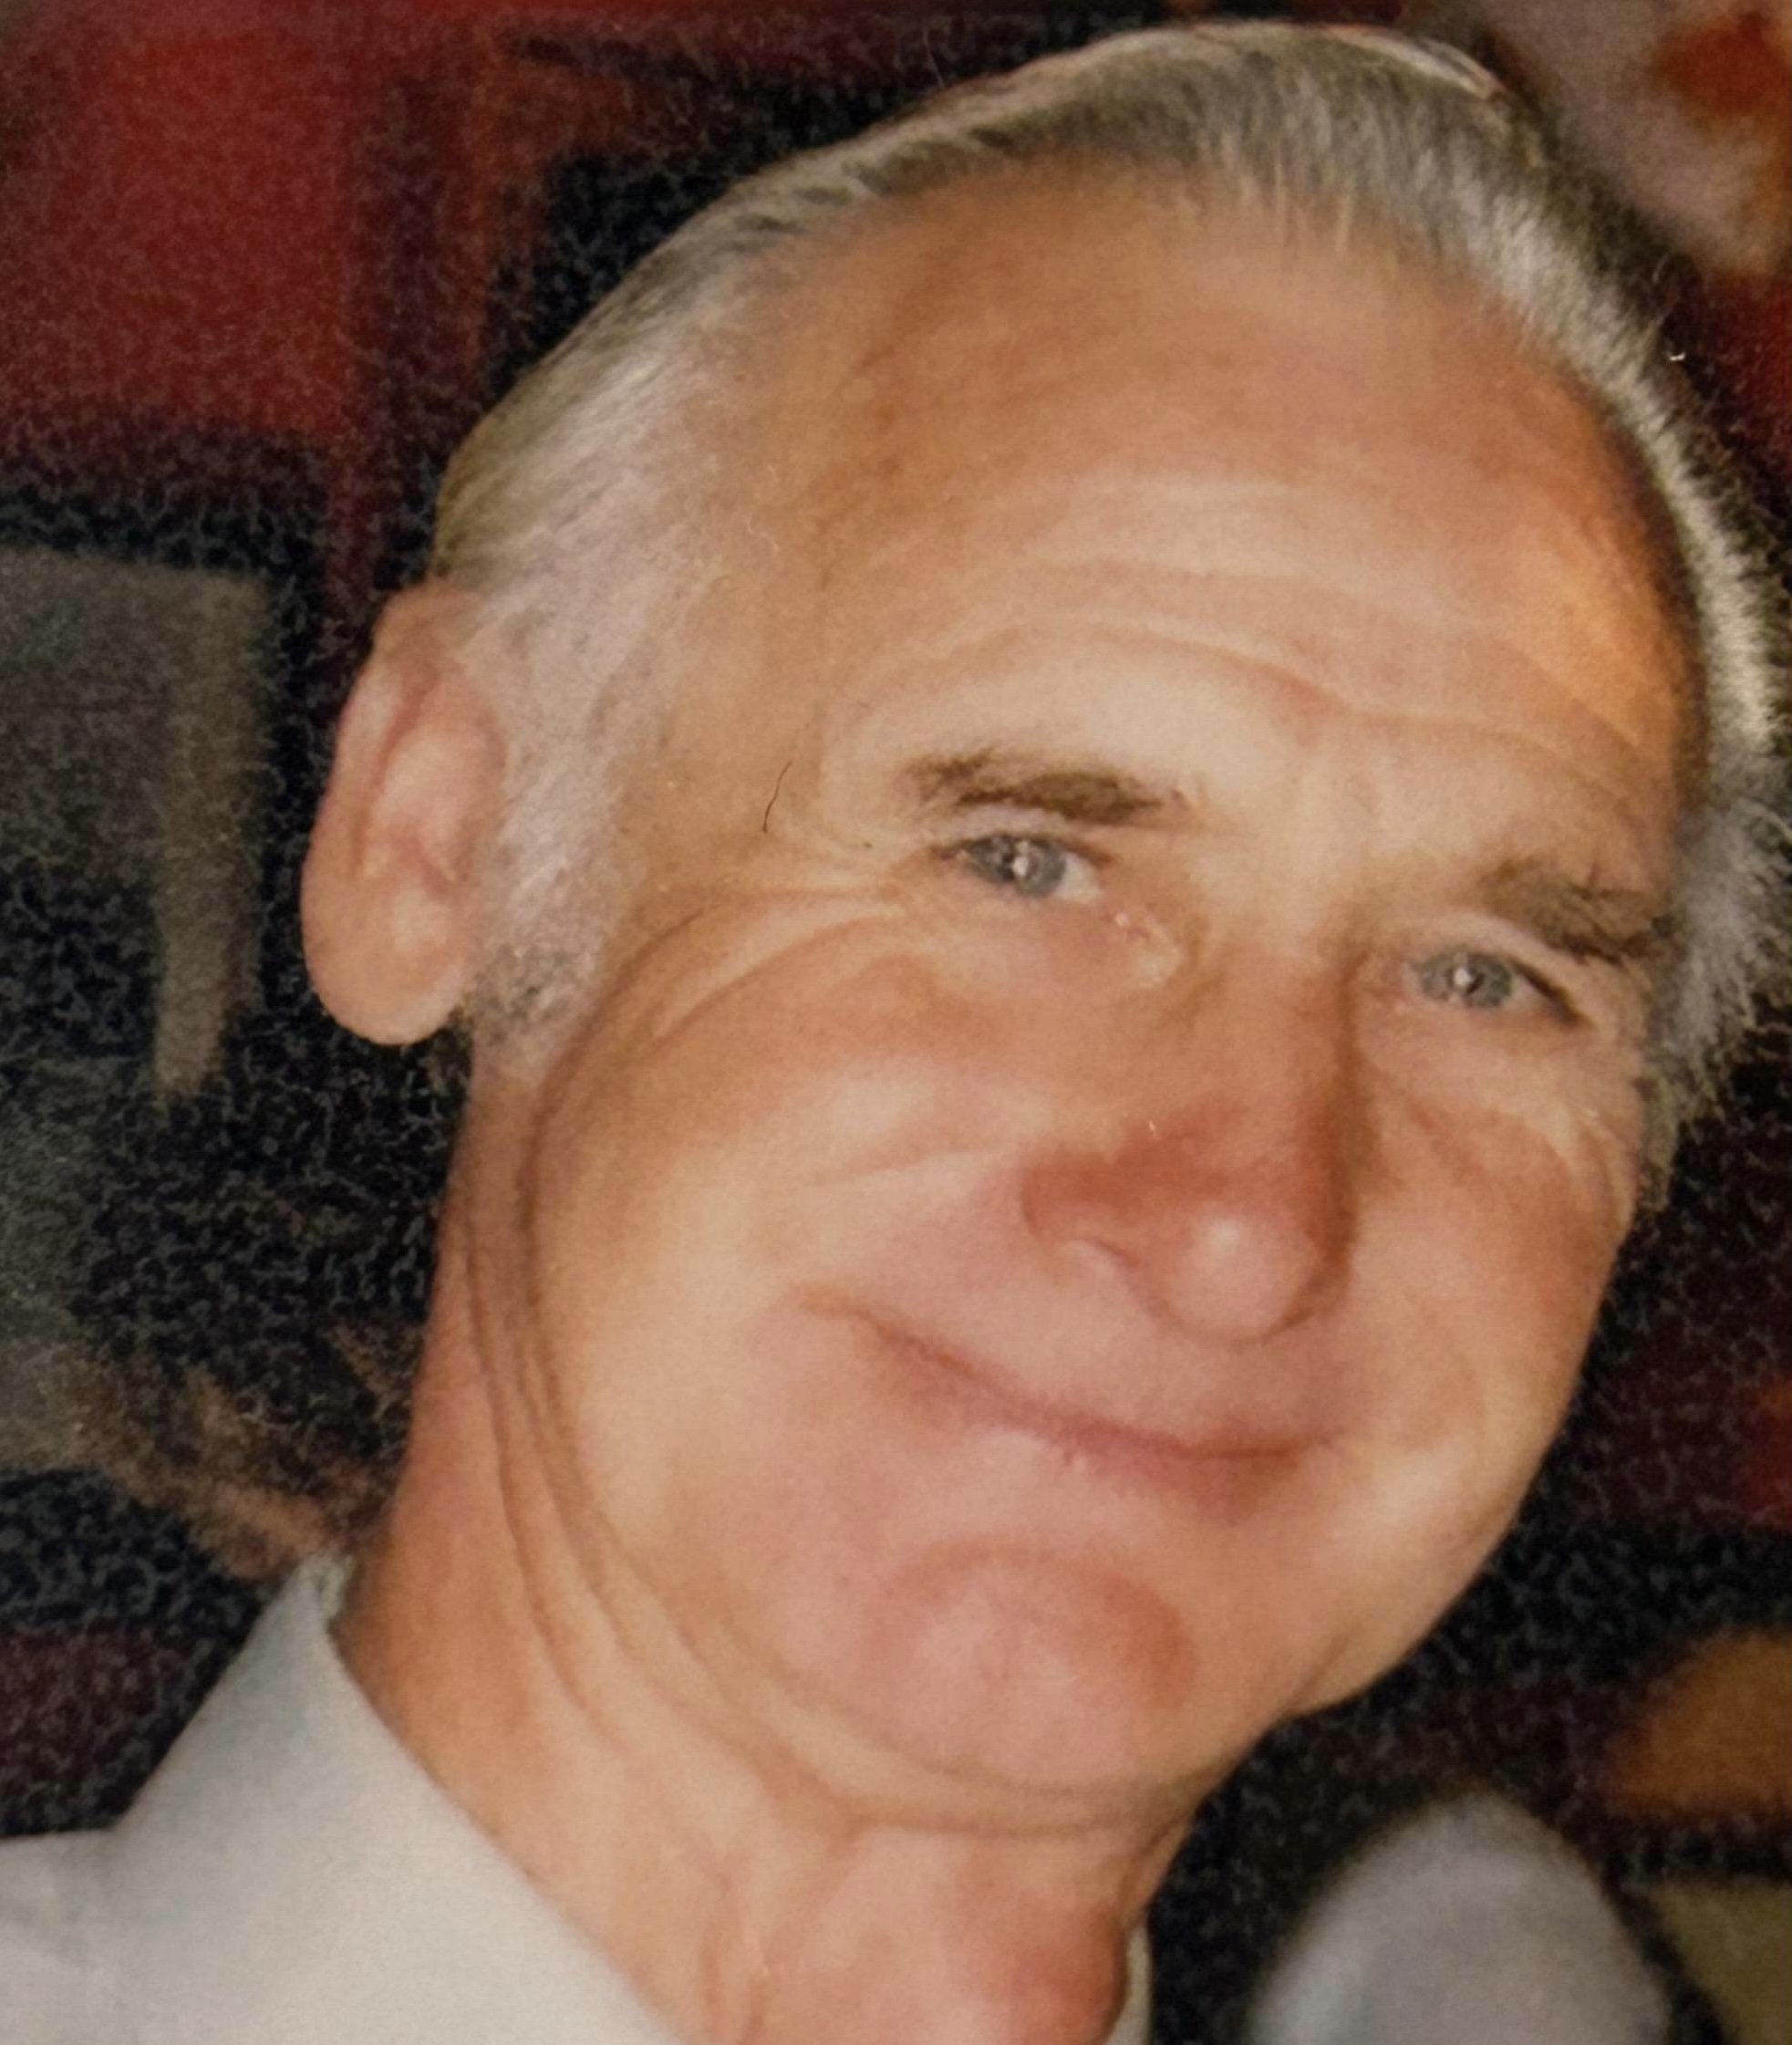 IN MEMORY | In loving memory of Alan Griffiths who passed away on 25th May